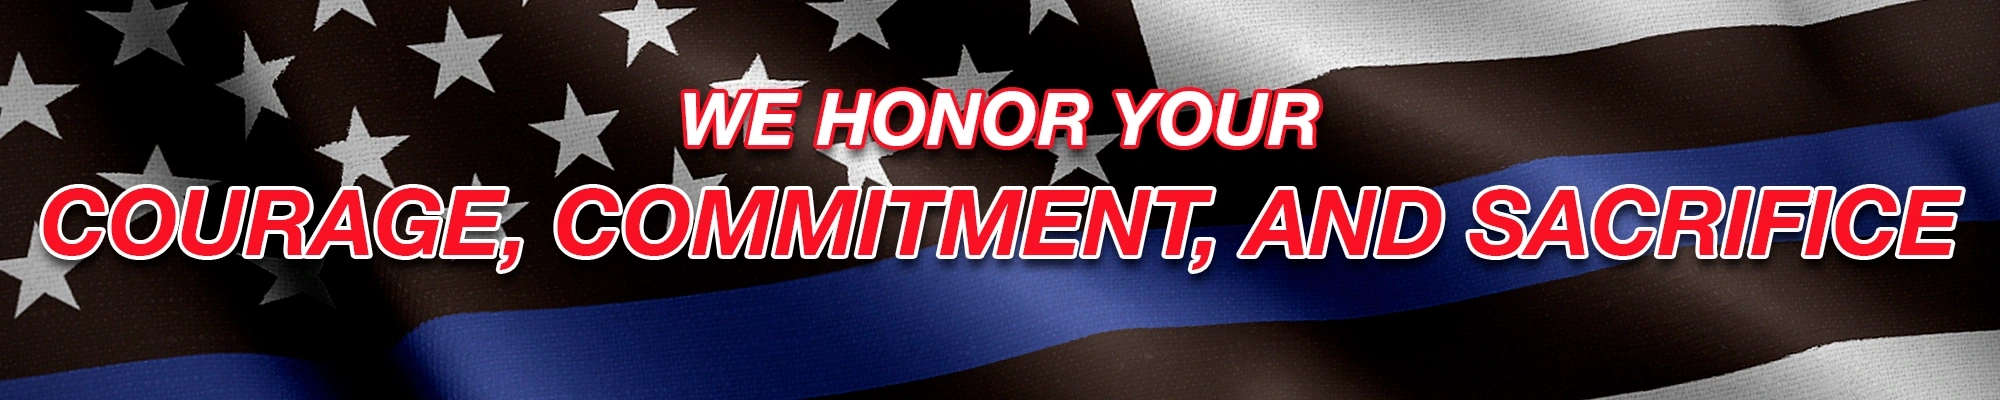 We honor your courage, commitment, and sacrifice